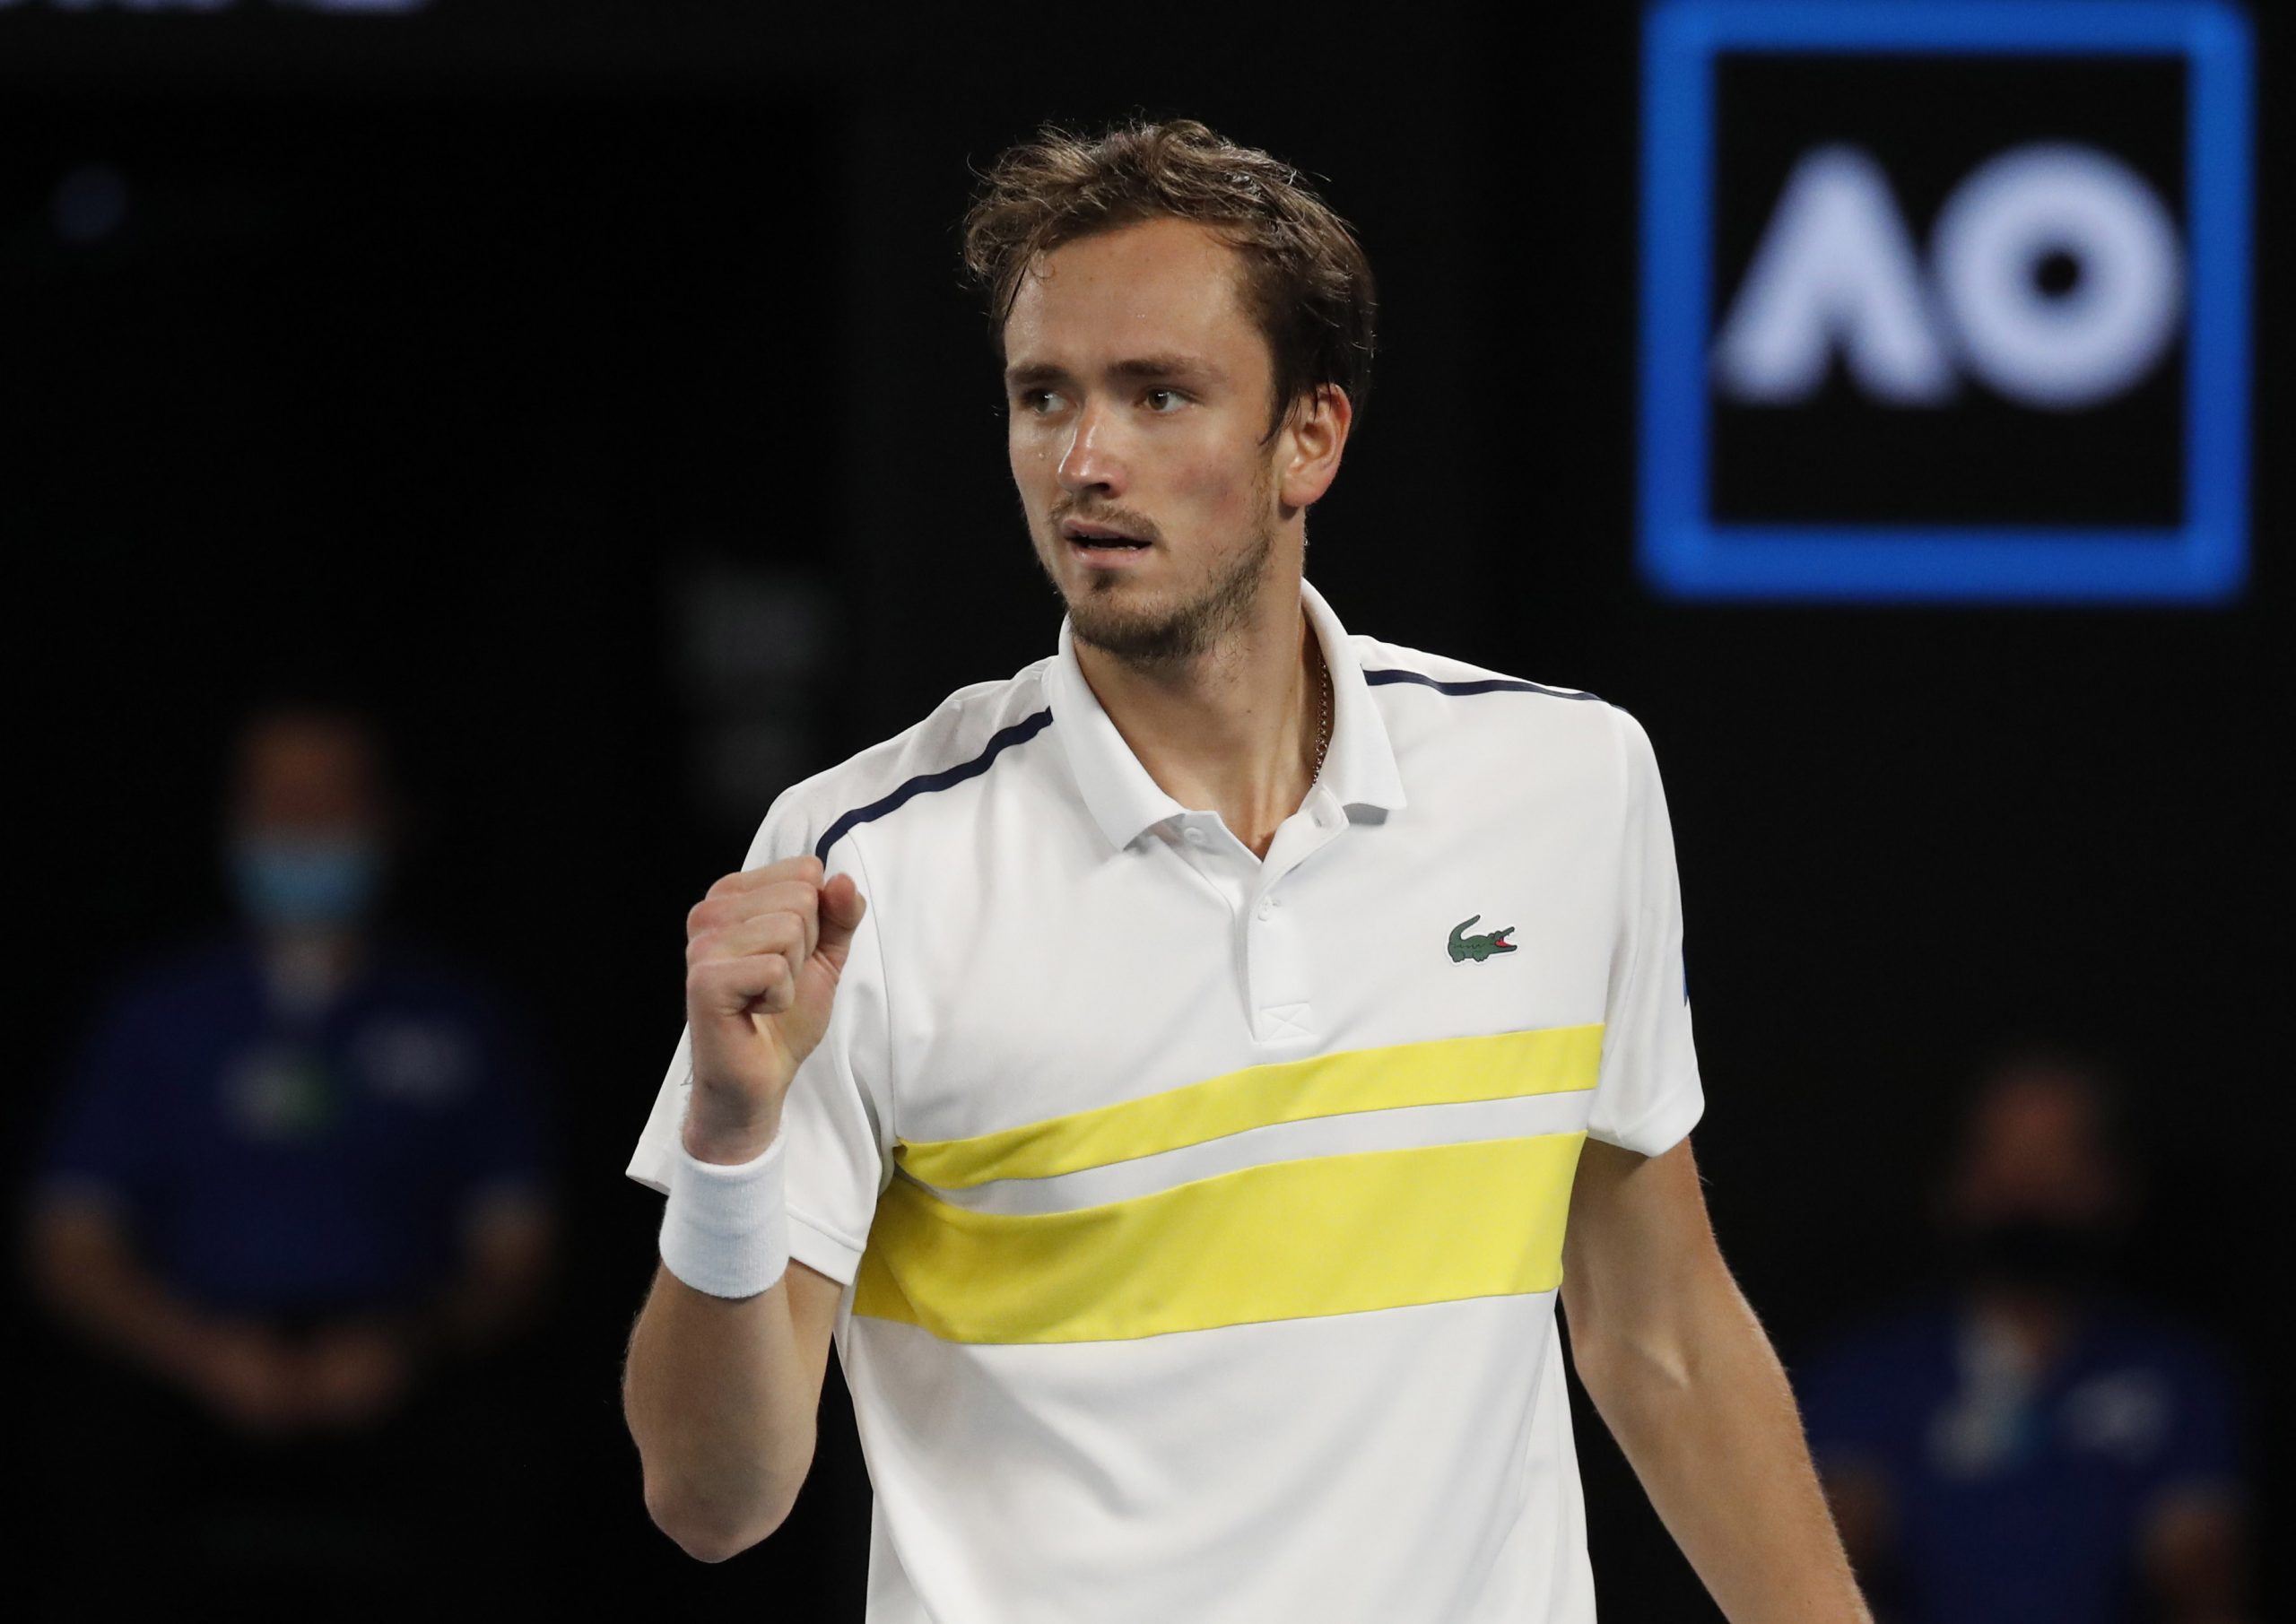 The 25-year-old Medvedev, who has played Grand Slam finals at the Australian and US Opens, is certainly expecting to go through to the second round at Roland Garros.